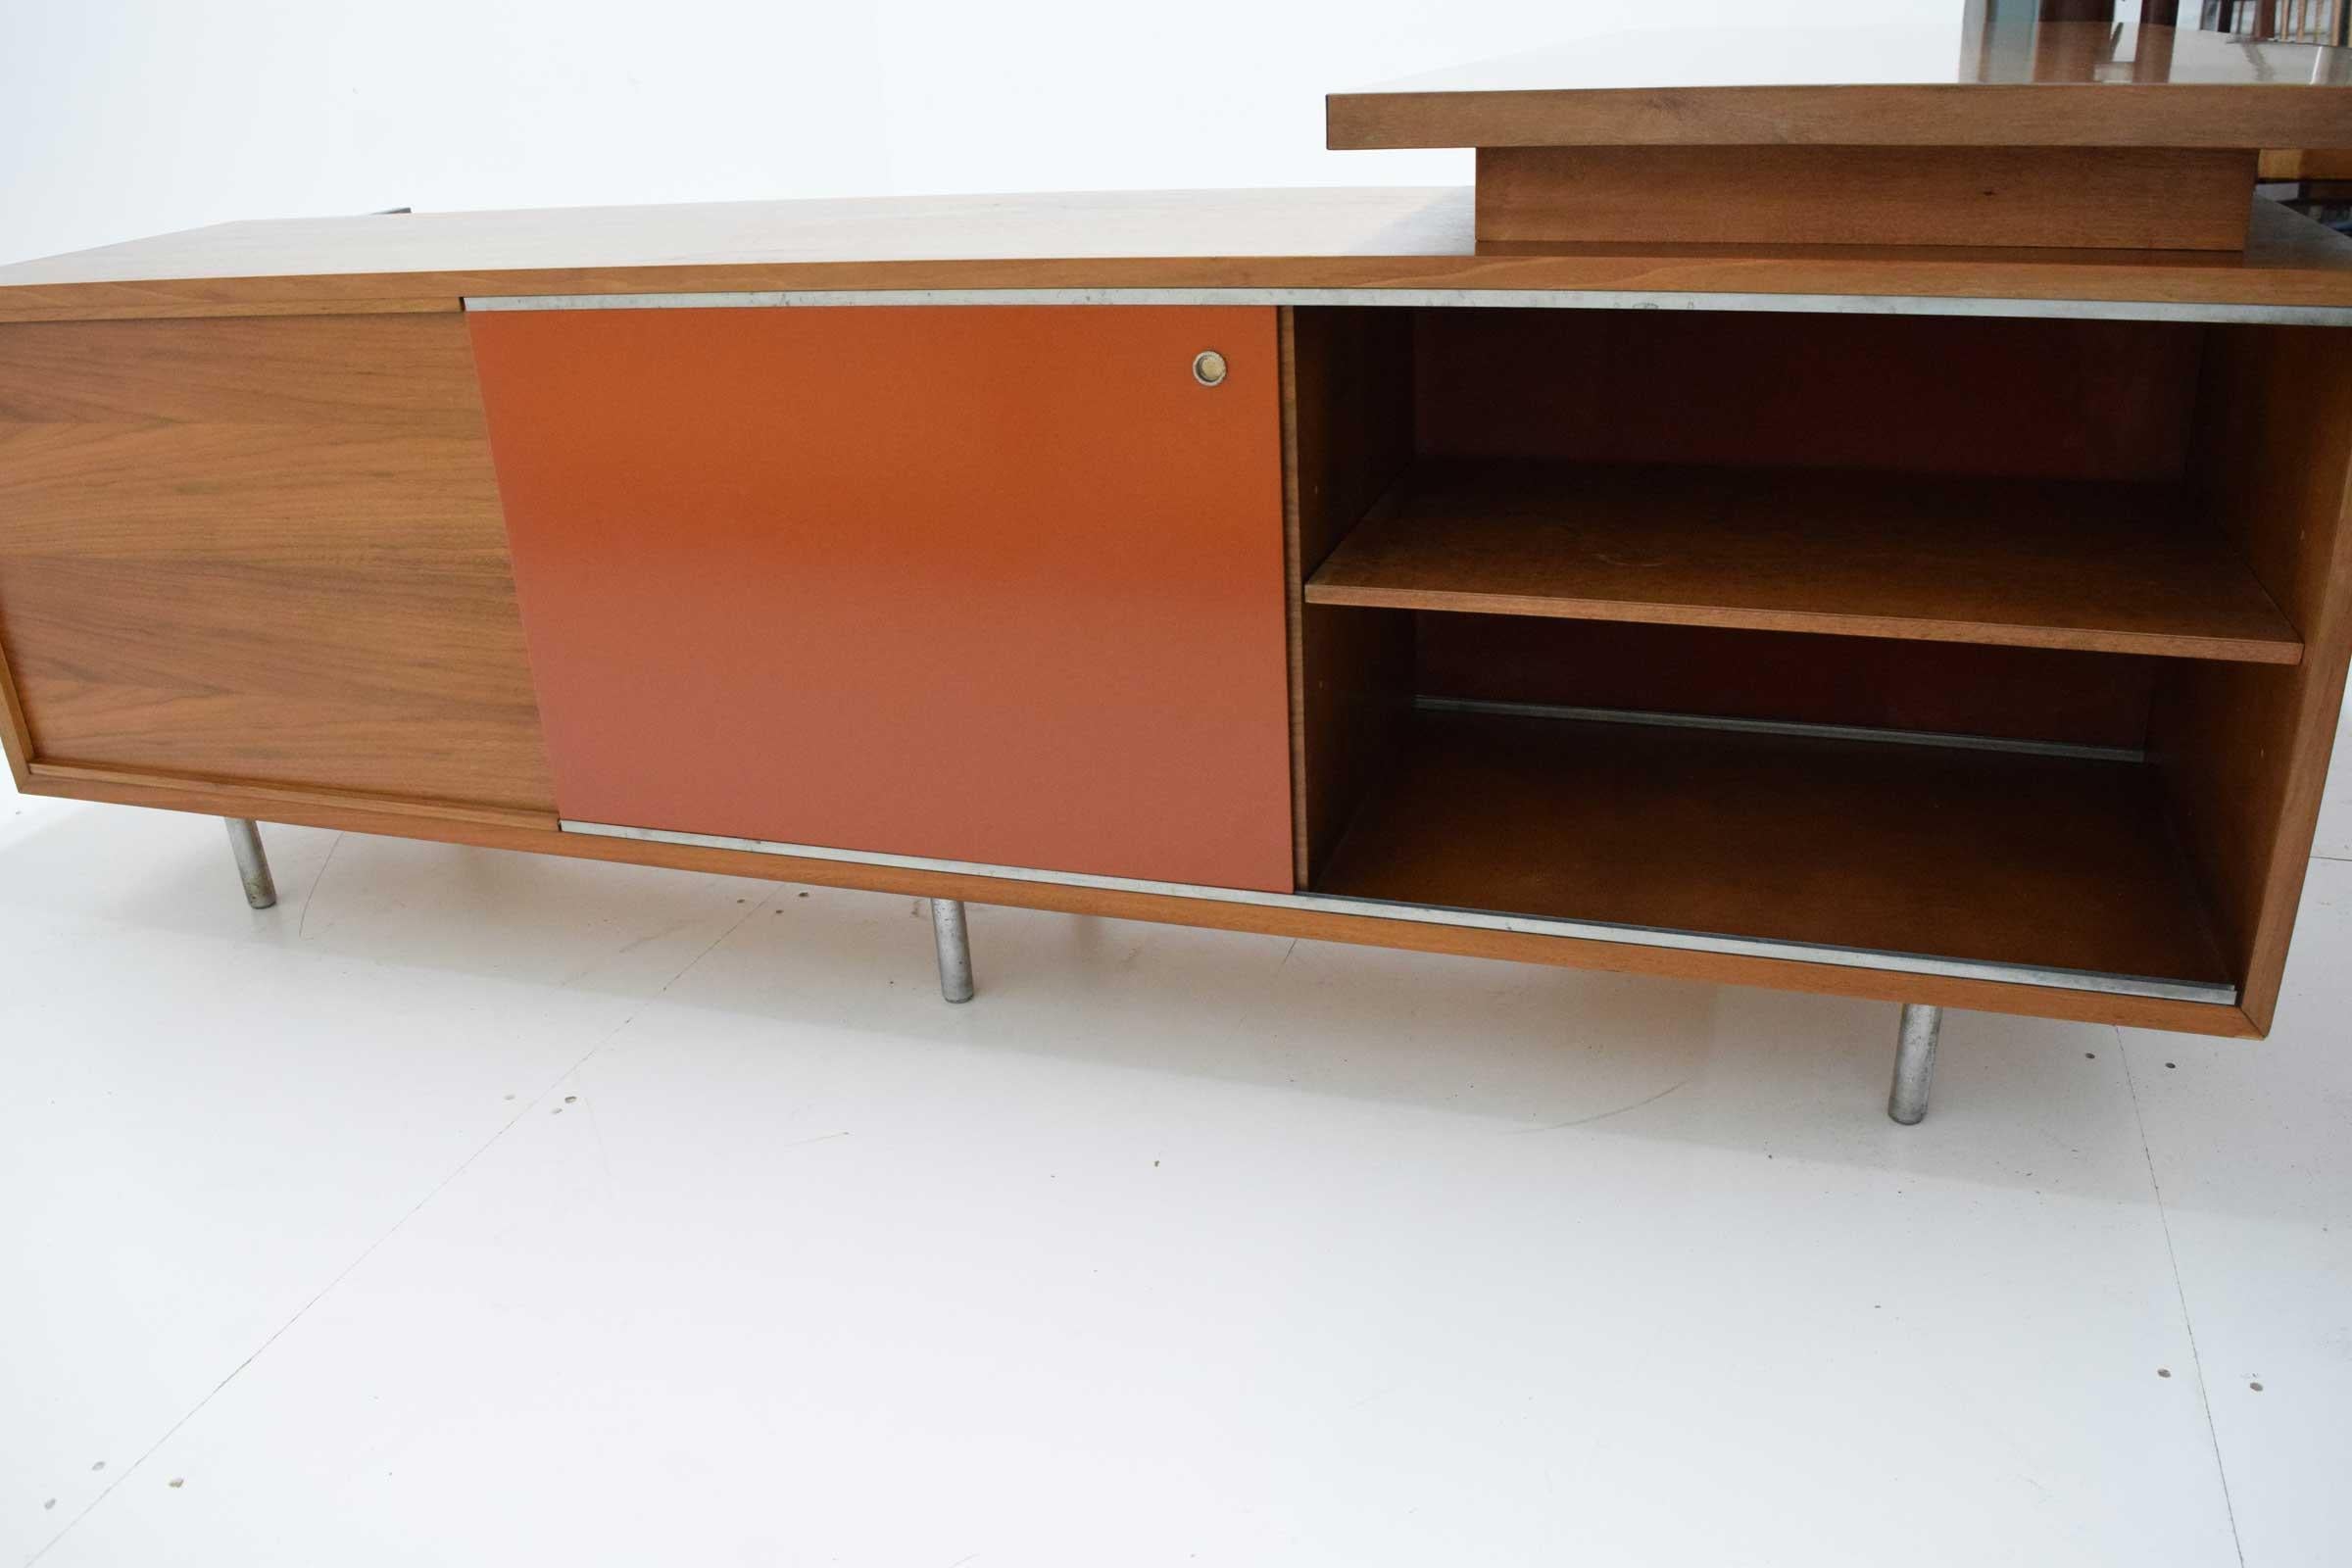 Executive L-shaped desk with original wood grained laminate writing surface, two sided credenza with red masonite sliding doors, drawers and adjustable shelves. Walnut on nickel plated steel legs. Cane modesty panel.
Work surface 78